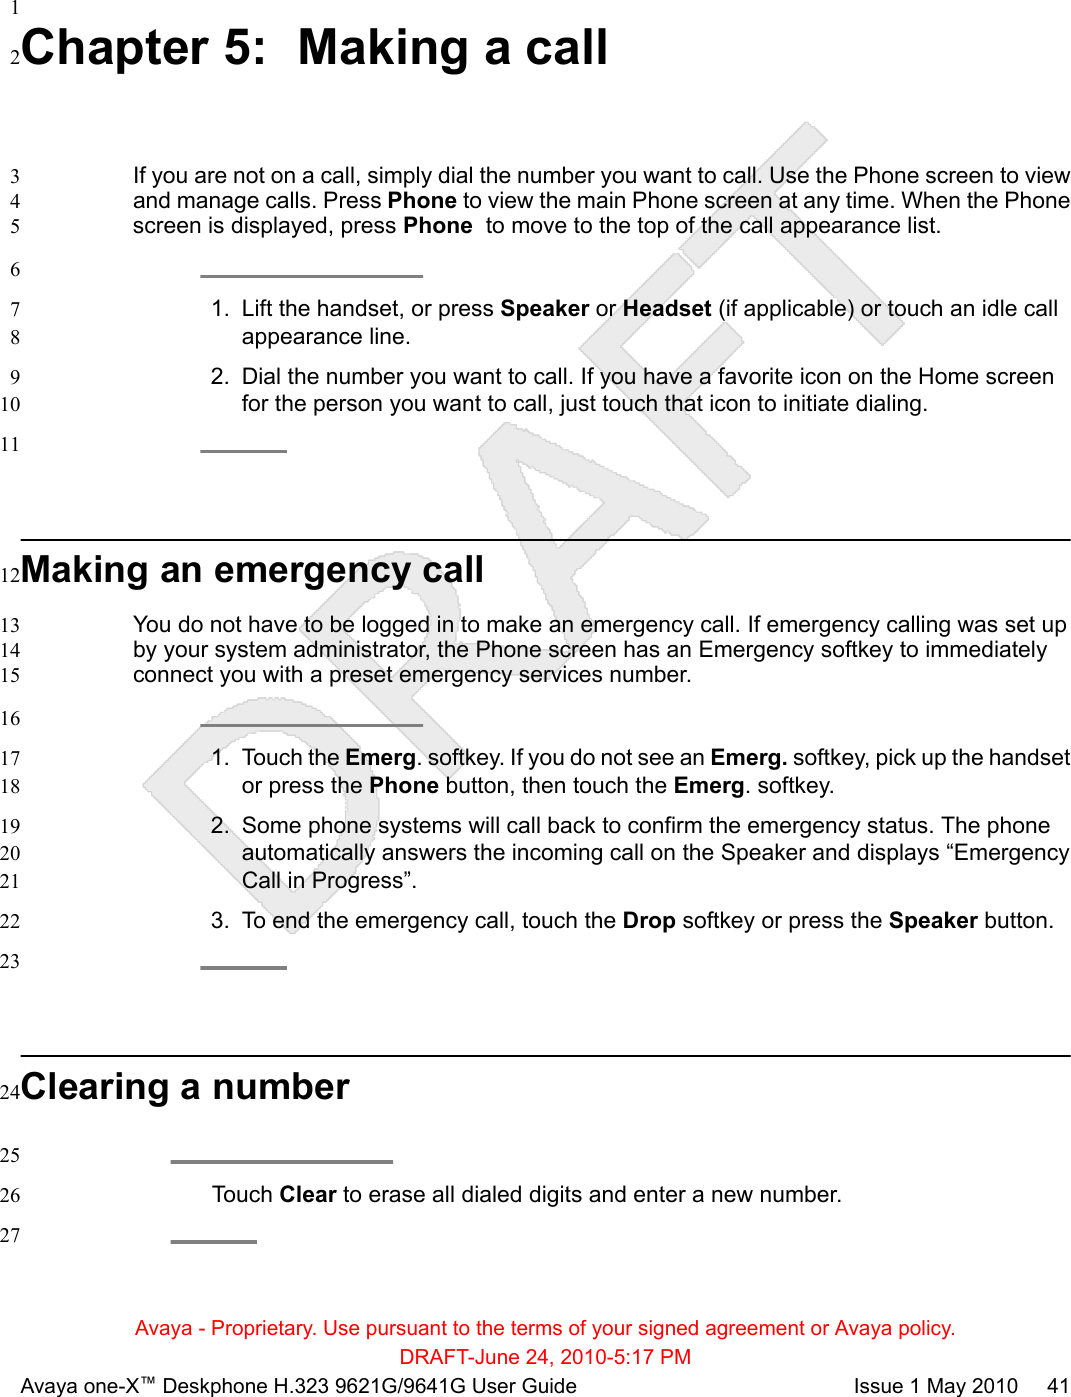 1Chapter 5:  Making a call2If you are not on a call, simply dial the number you want to call. Use the Phone screen to view3and manage calls. Press Phone to view the main Phone screen at any time. When the Phone4screen is displayed, press Phone  to move to the top of the call appearance list.561. Lift the handset, or press Speaker or Headset (if applicable) or touch an idle call7appearance line.82. Dial the number you want to call. If you have a favorite icon on the Home screen9for the person you want to call, just touch that icon to initiate dialing.1011Making an emergency call12You do not have to be logged in to make an emergency call. If emergency calling was set up13by your system administrator, the Phone screen has an Emergency softkey to immediately14connect you with a preset emergency services number.15161. Touch the Emerg. softkey. If you do not see an Emerg. softkey, pick up the handset17or press the Phone button, then touch the Emerg. softkey.182. Some phone systems will call back to confirm the emergency status. The phone19automatically answers the incoming call on the Speaker and displays “Emergency20Call in Progress”.213. To end the emergency call, touch the Drop softkey or press the Speaker button.2223Clearing a number2425Touch Clear to erase all dialed digits and enter a new number.2627Avaya - Proprietary. Use pursuant to the terms of your signed agreement or Avaya policy.DRAFT-June 24, 2010-5:17 PMAvaya one-X™ Deskphone H.323 9621G/9641G User Guide Issue 1 May 2010     41